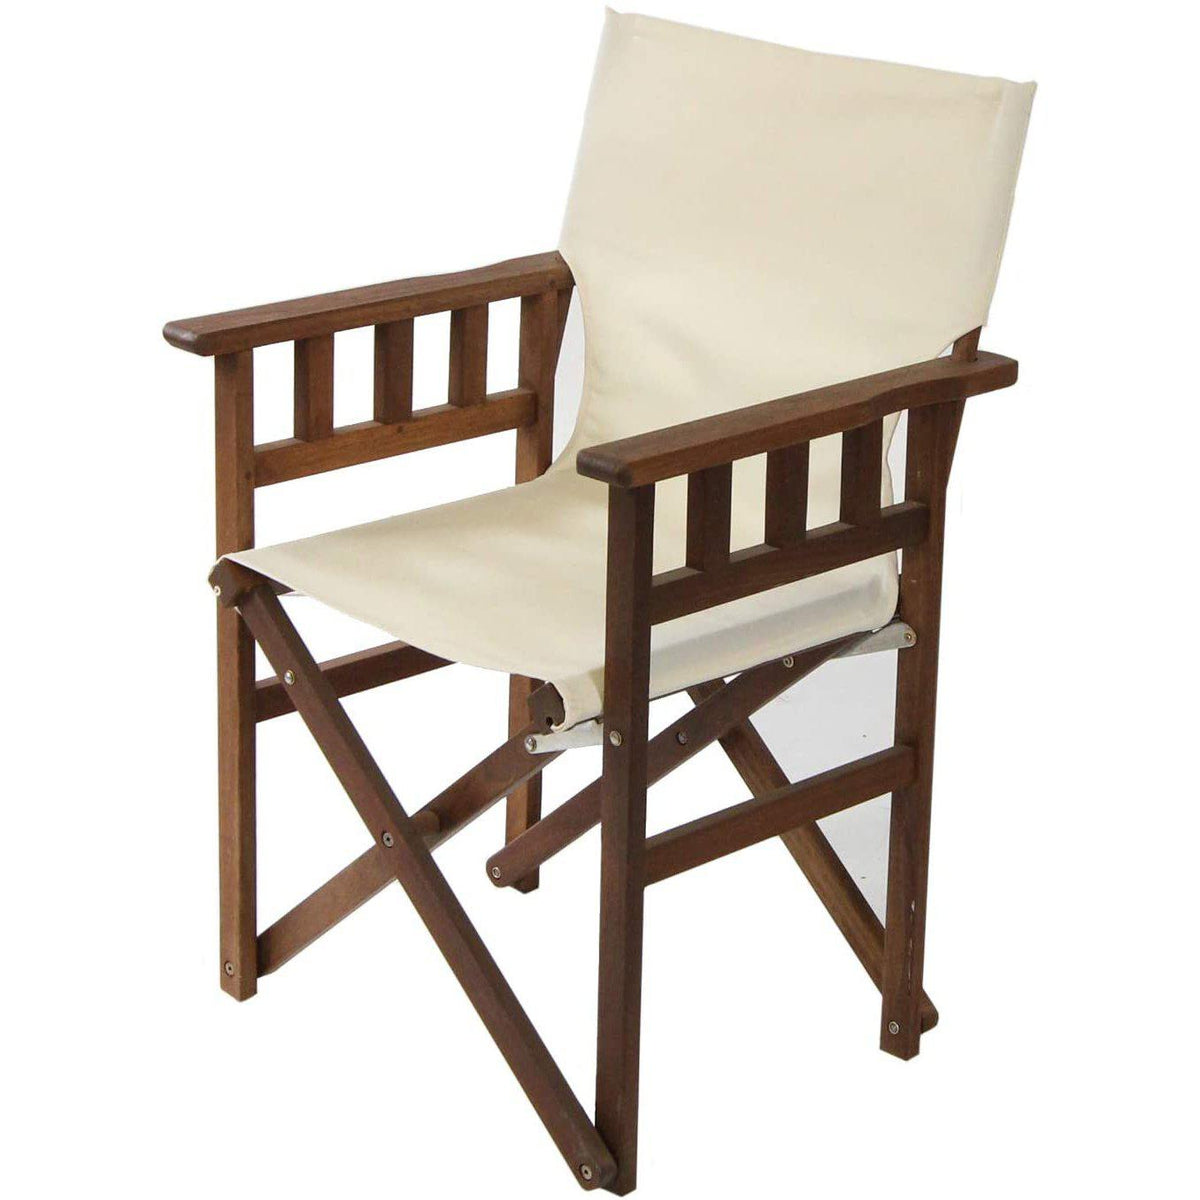 Pangean Campaign Chair, Natural, from Byer of Maine